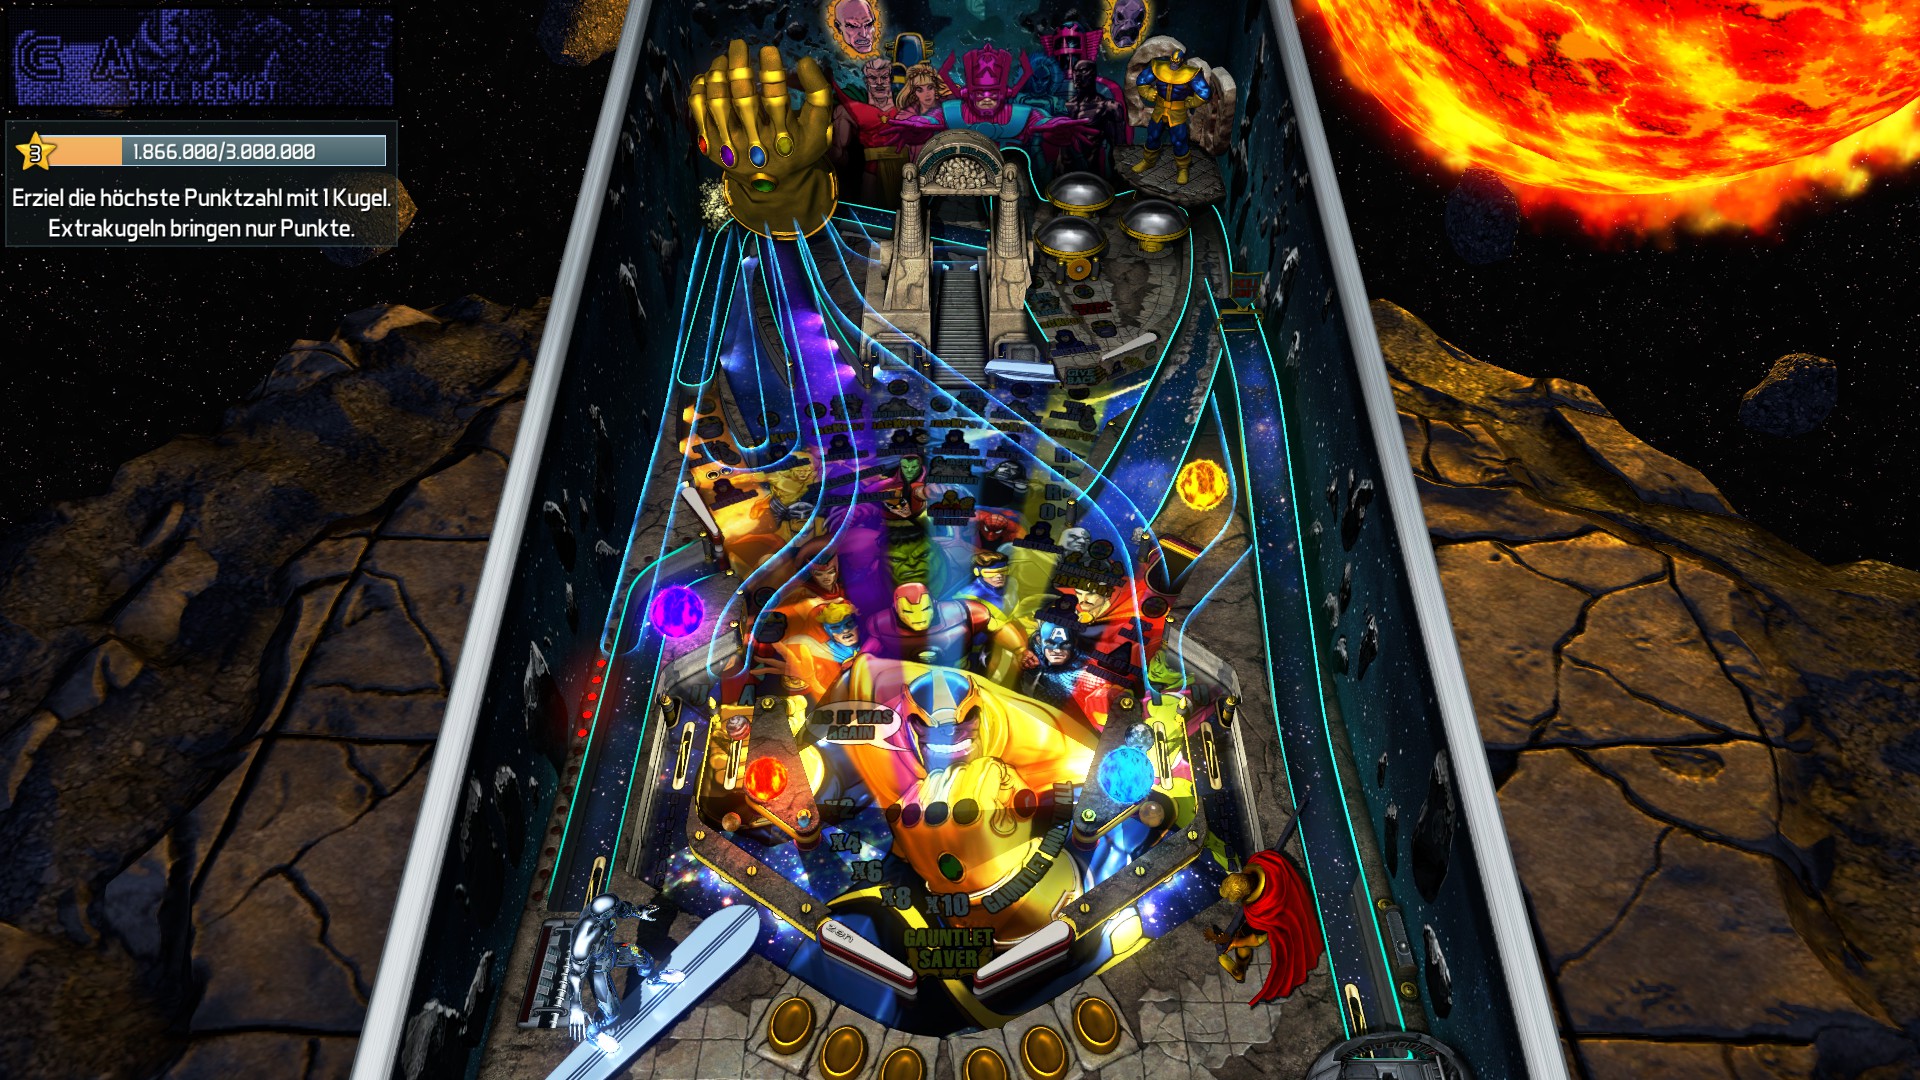 e2e4: Pinball FX3: The Infinity Gauntlet [1 Ball] (PC) 1,866,000 points on 2022-06-16 00:57:06